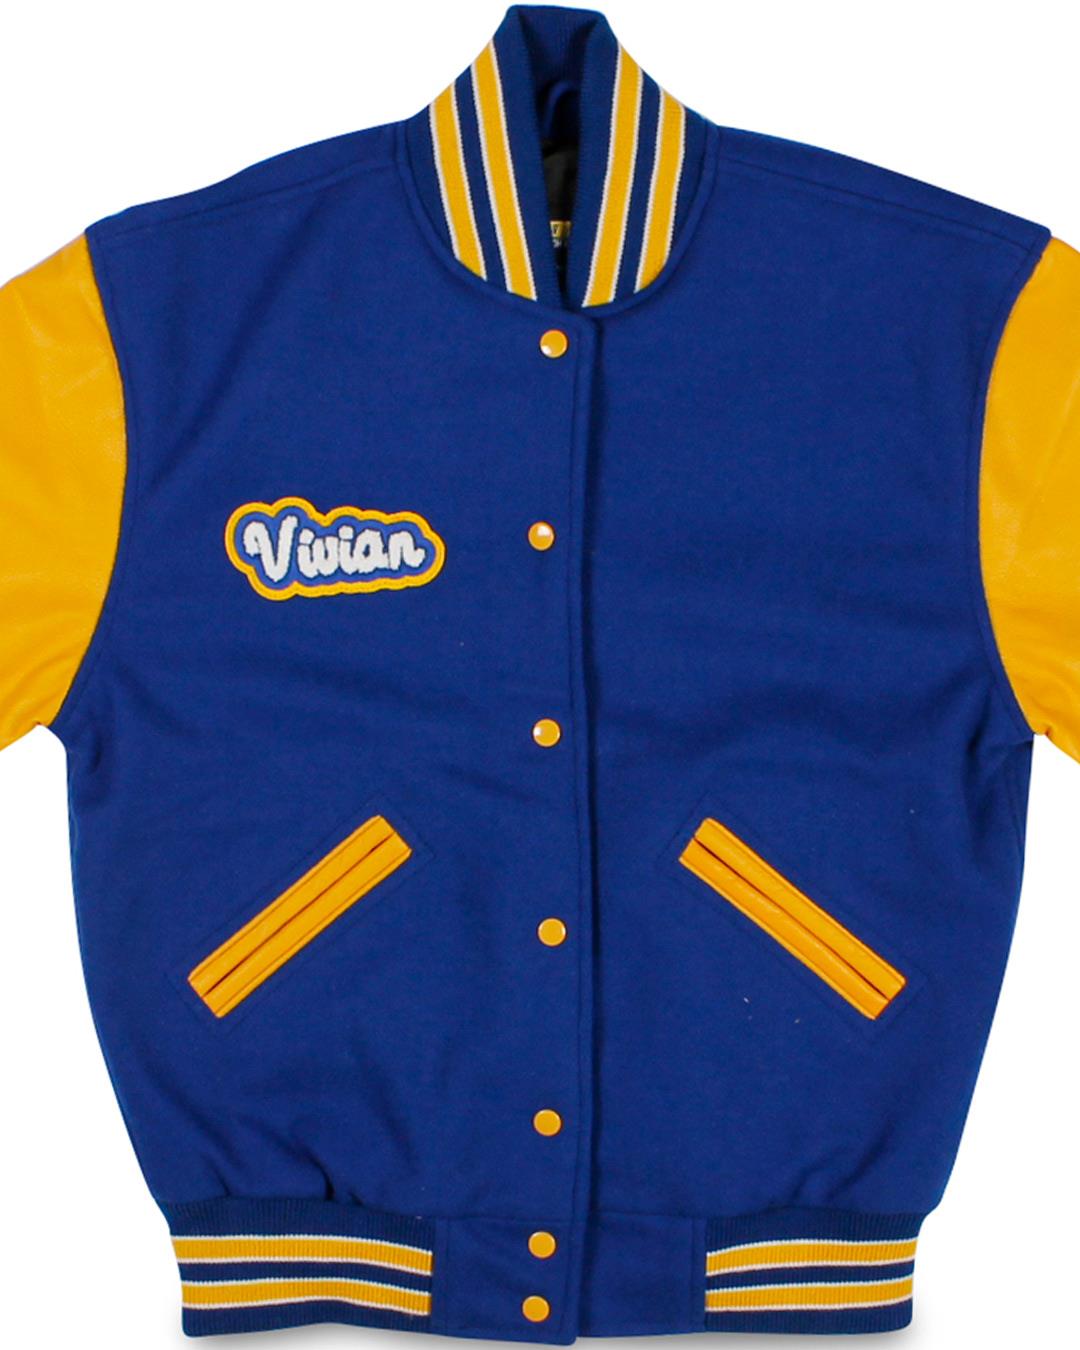 Lincoln High School Letterman Jacket, Gahanna OH - Front